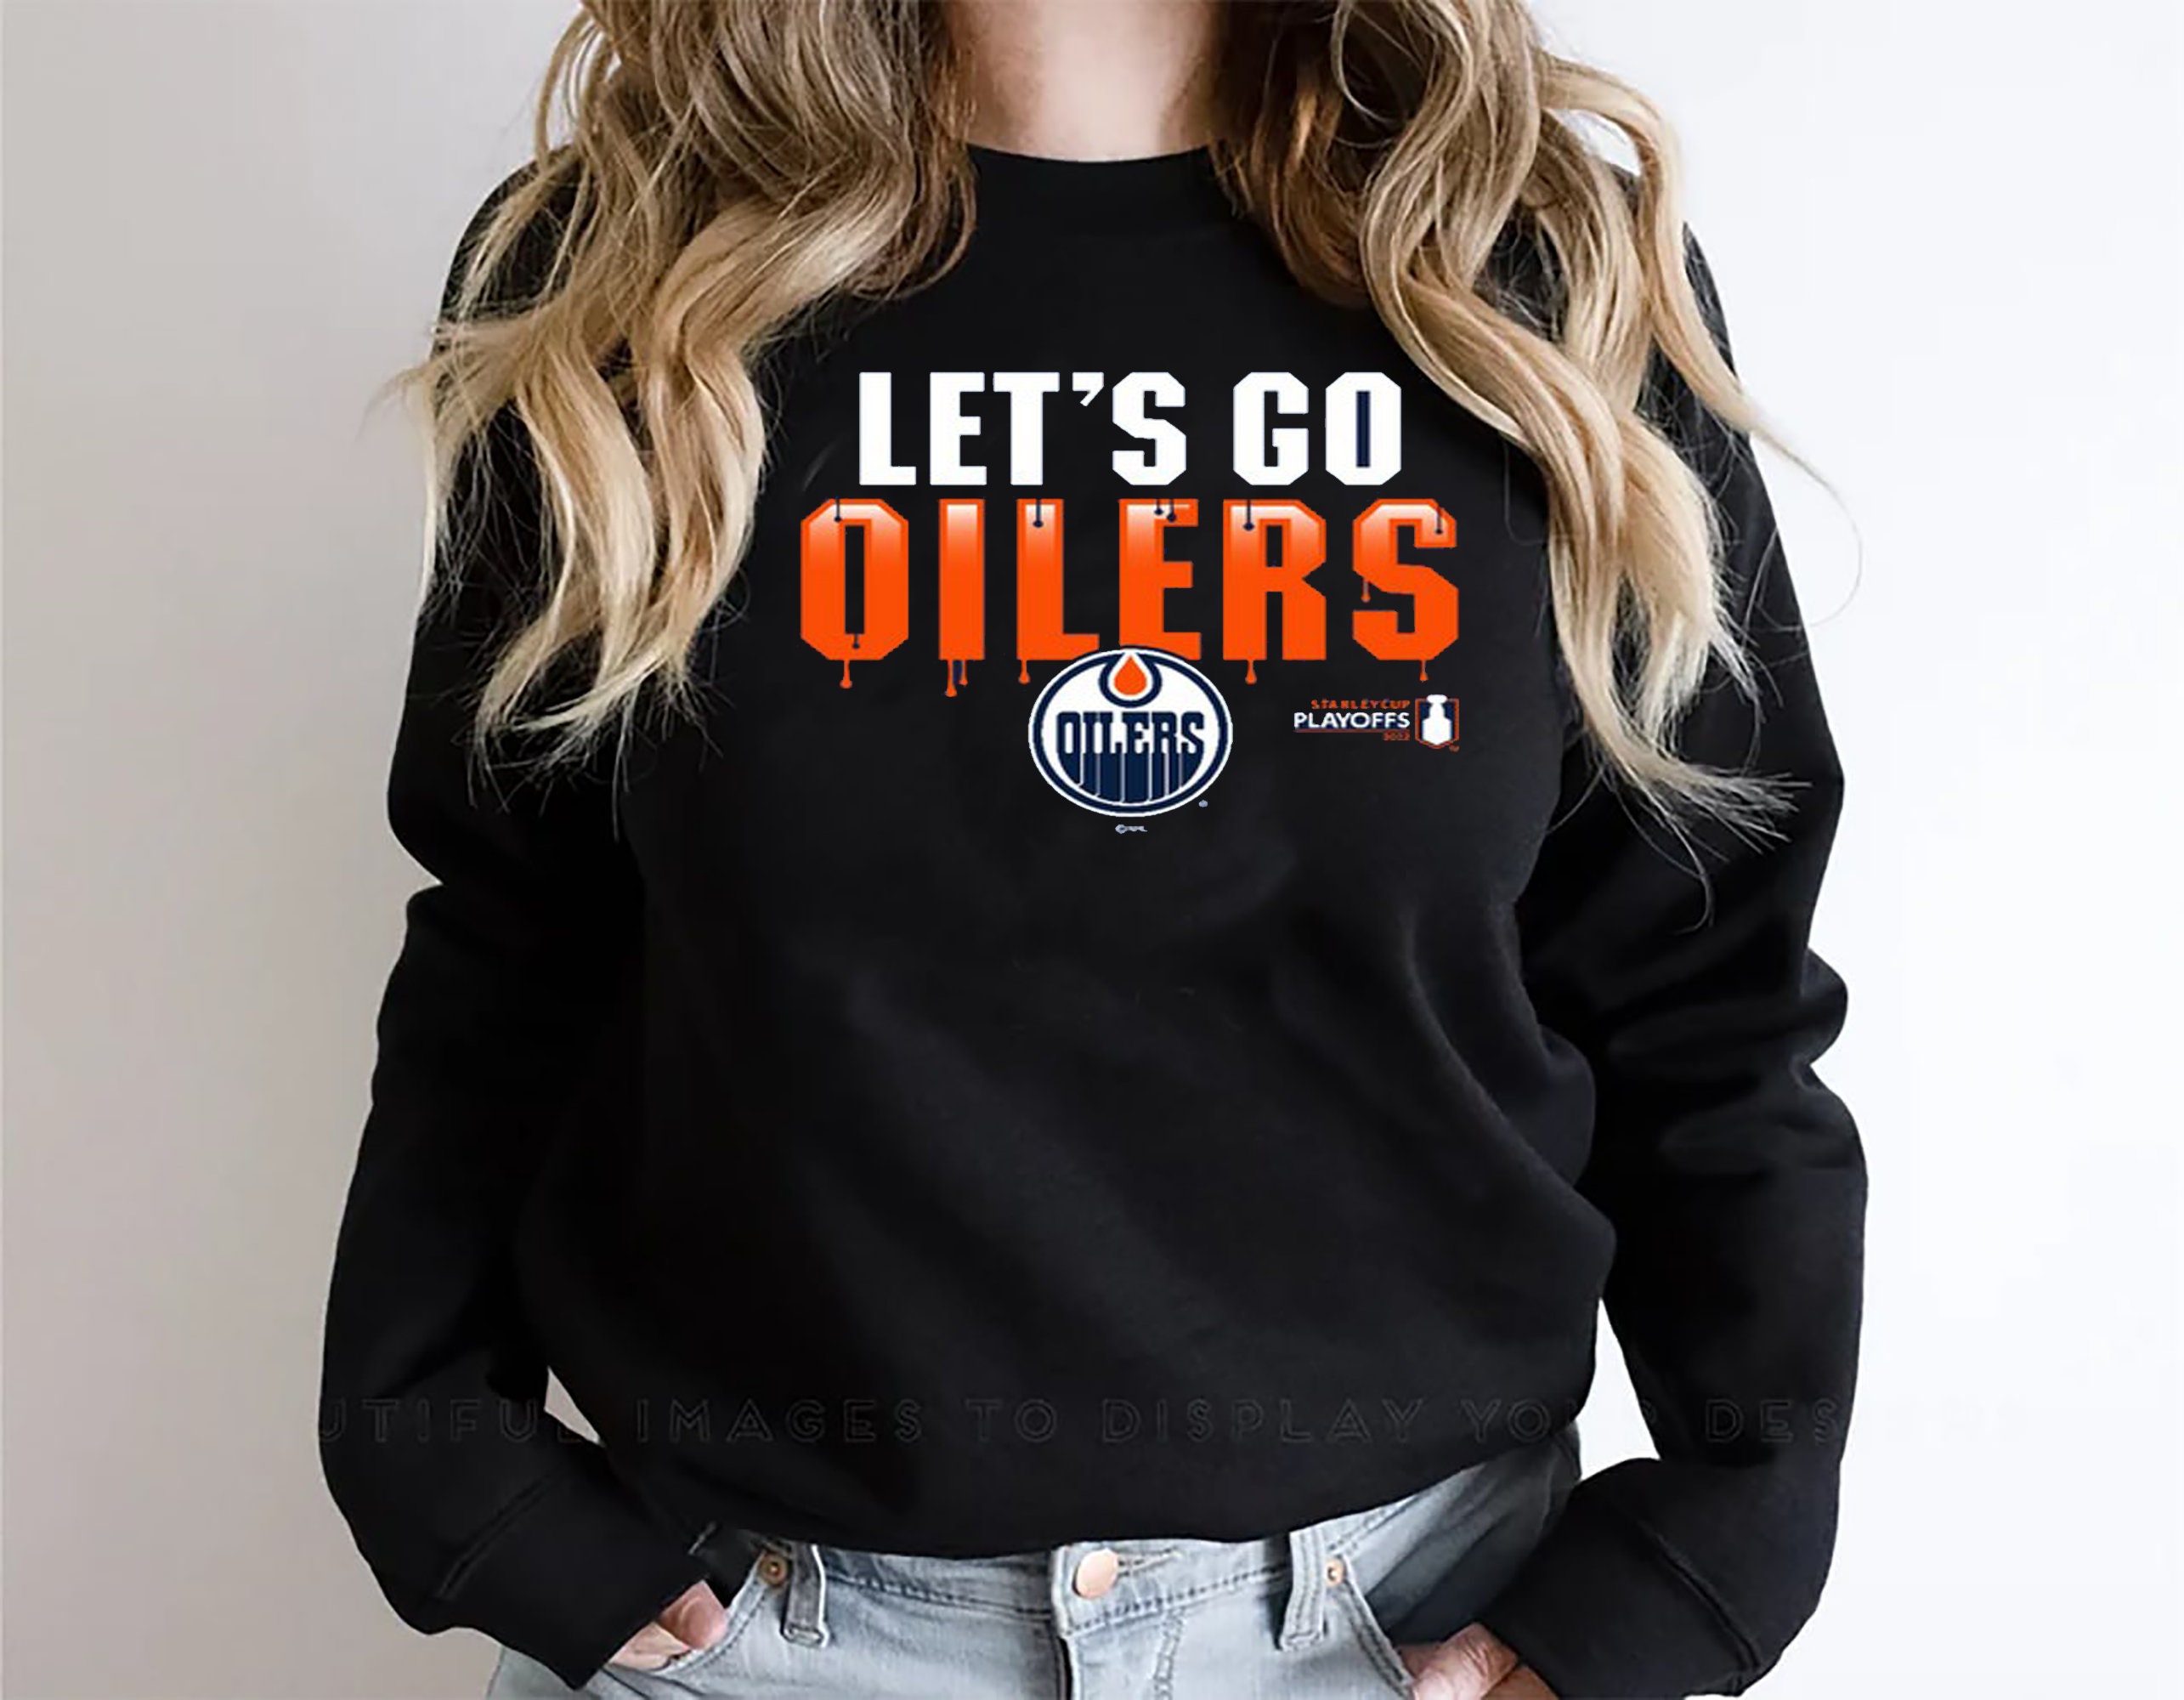 Let’s Go Oilers Oilers Edmonton Oilers 2022 Stanley Cup Playoffs Unisex T-Shirt